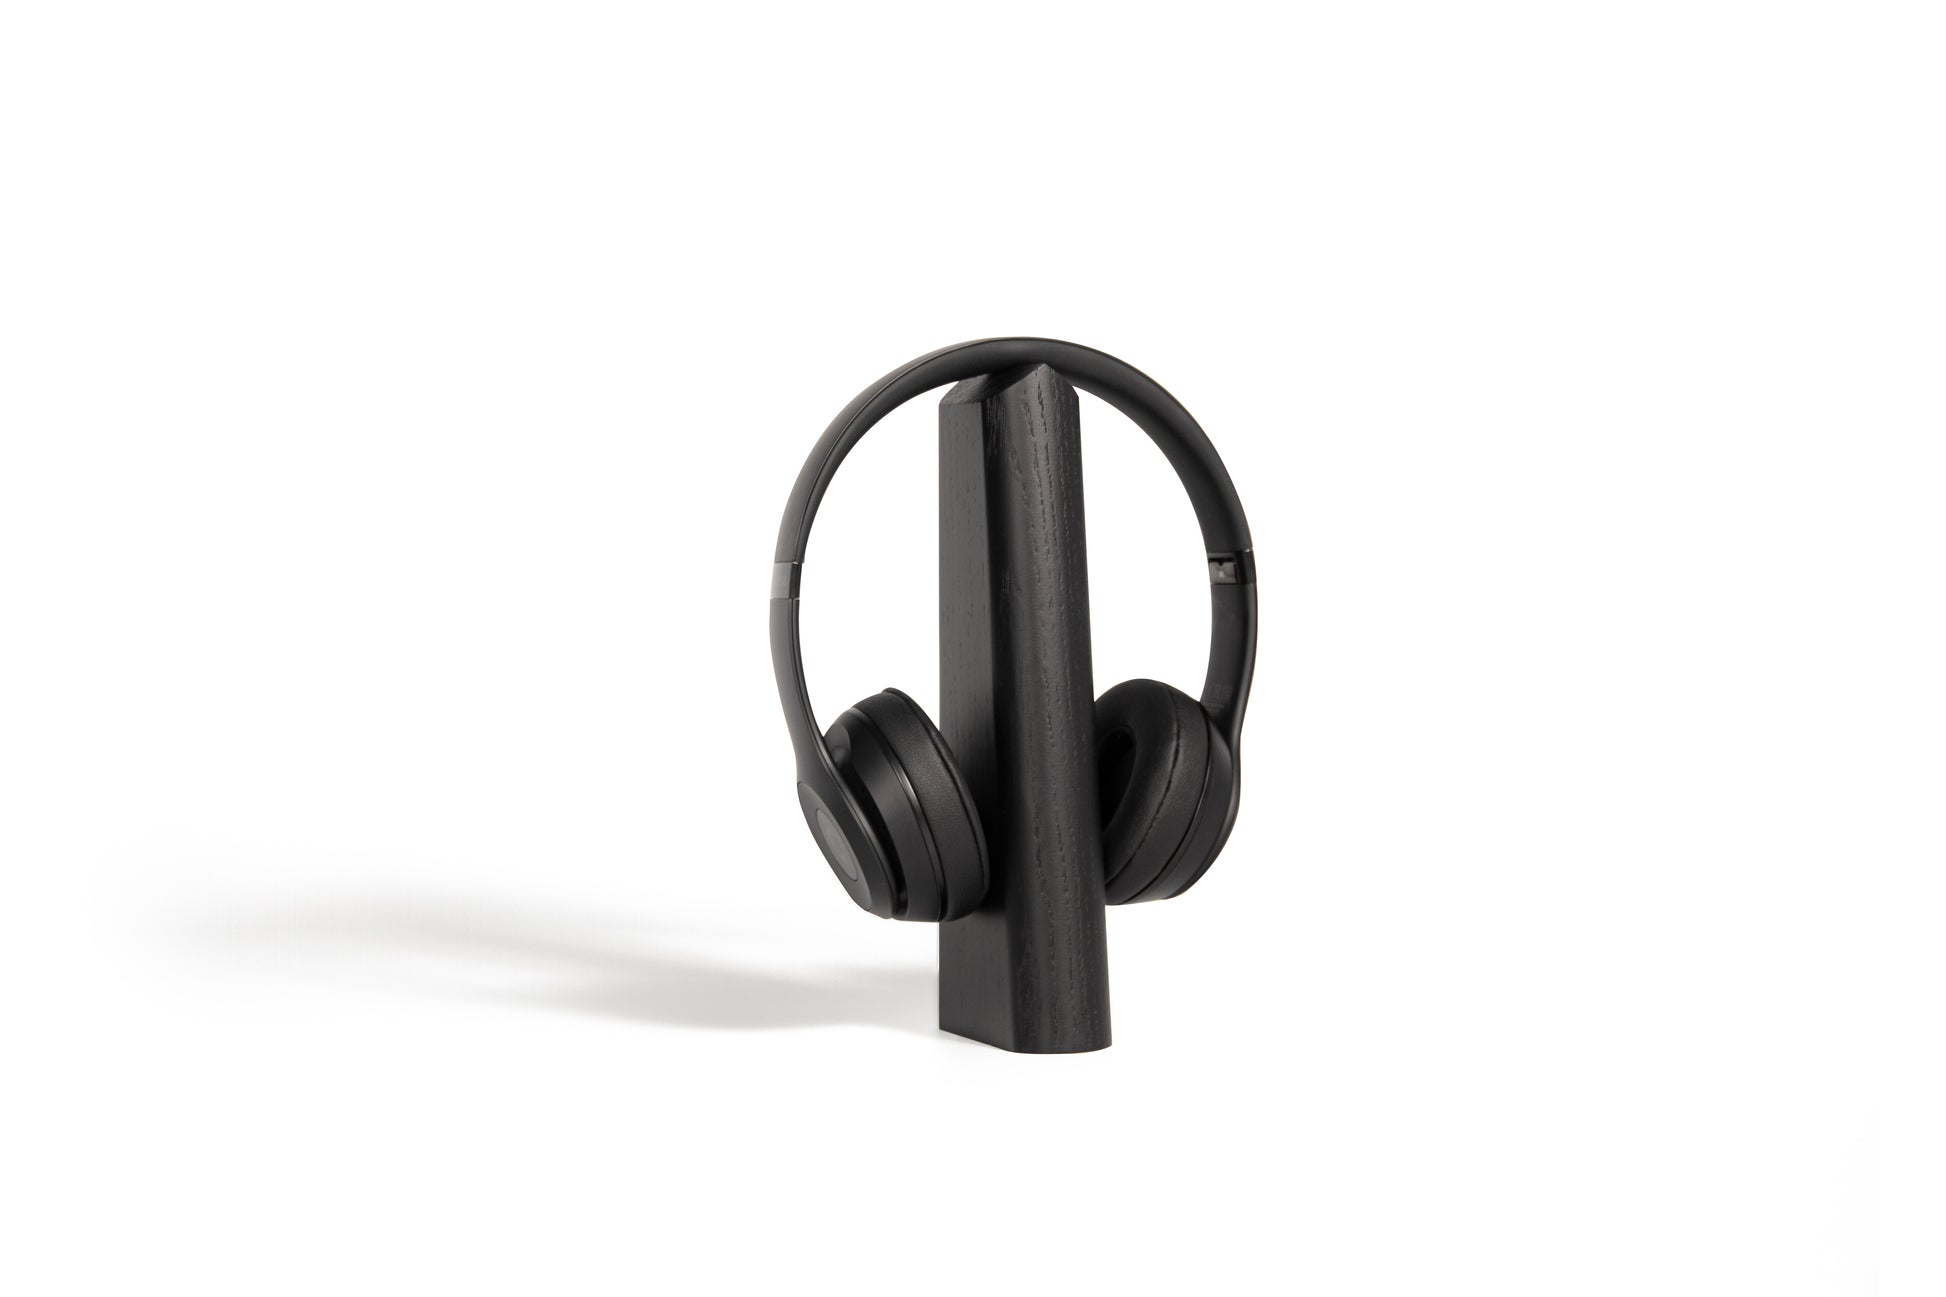 mallo geo in black with Beats headphones over the top on a white background